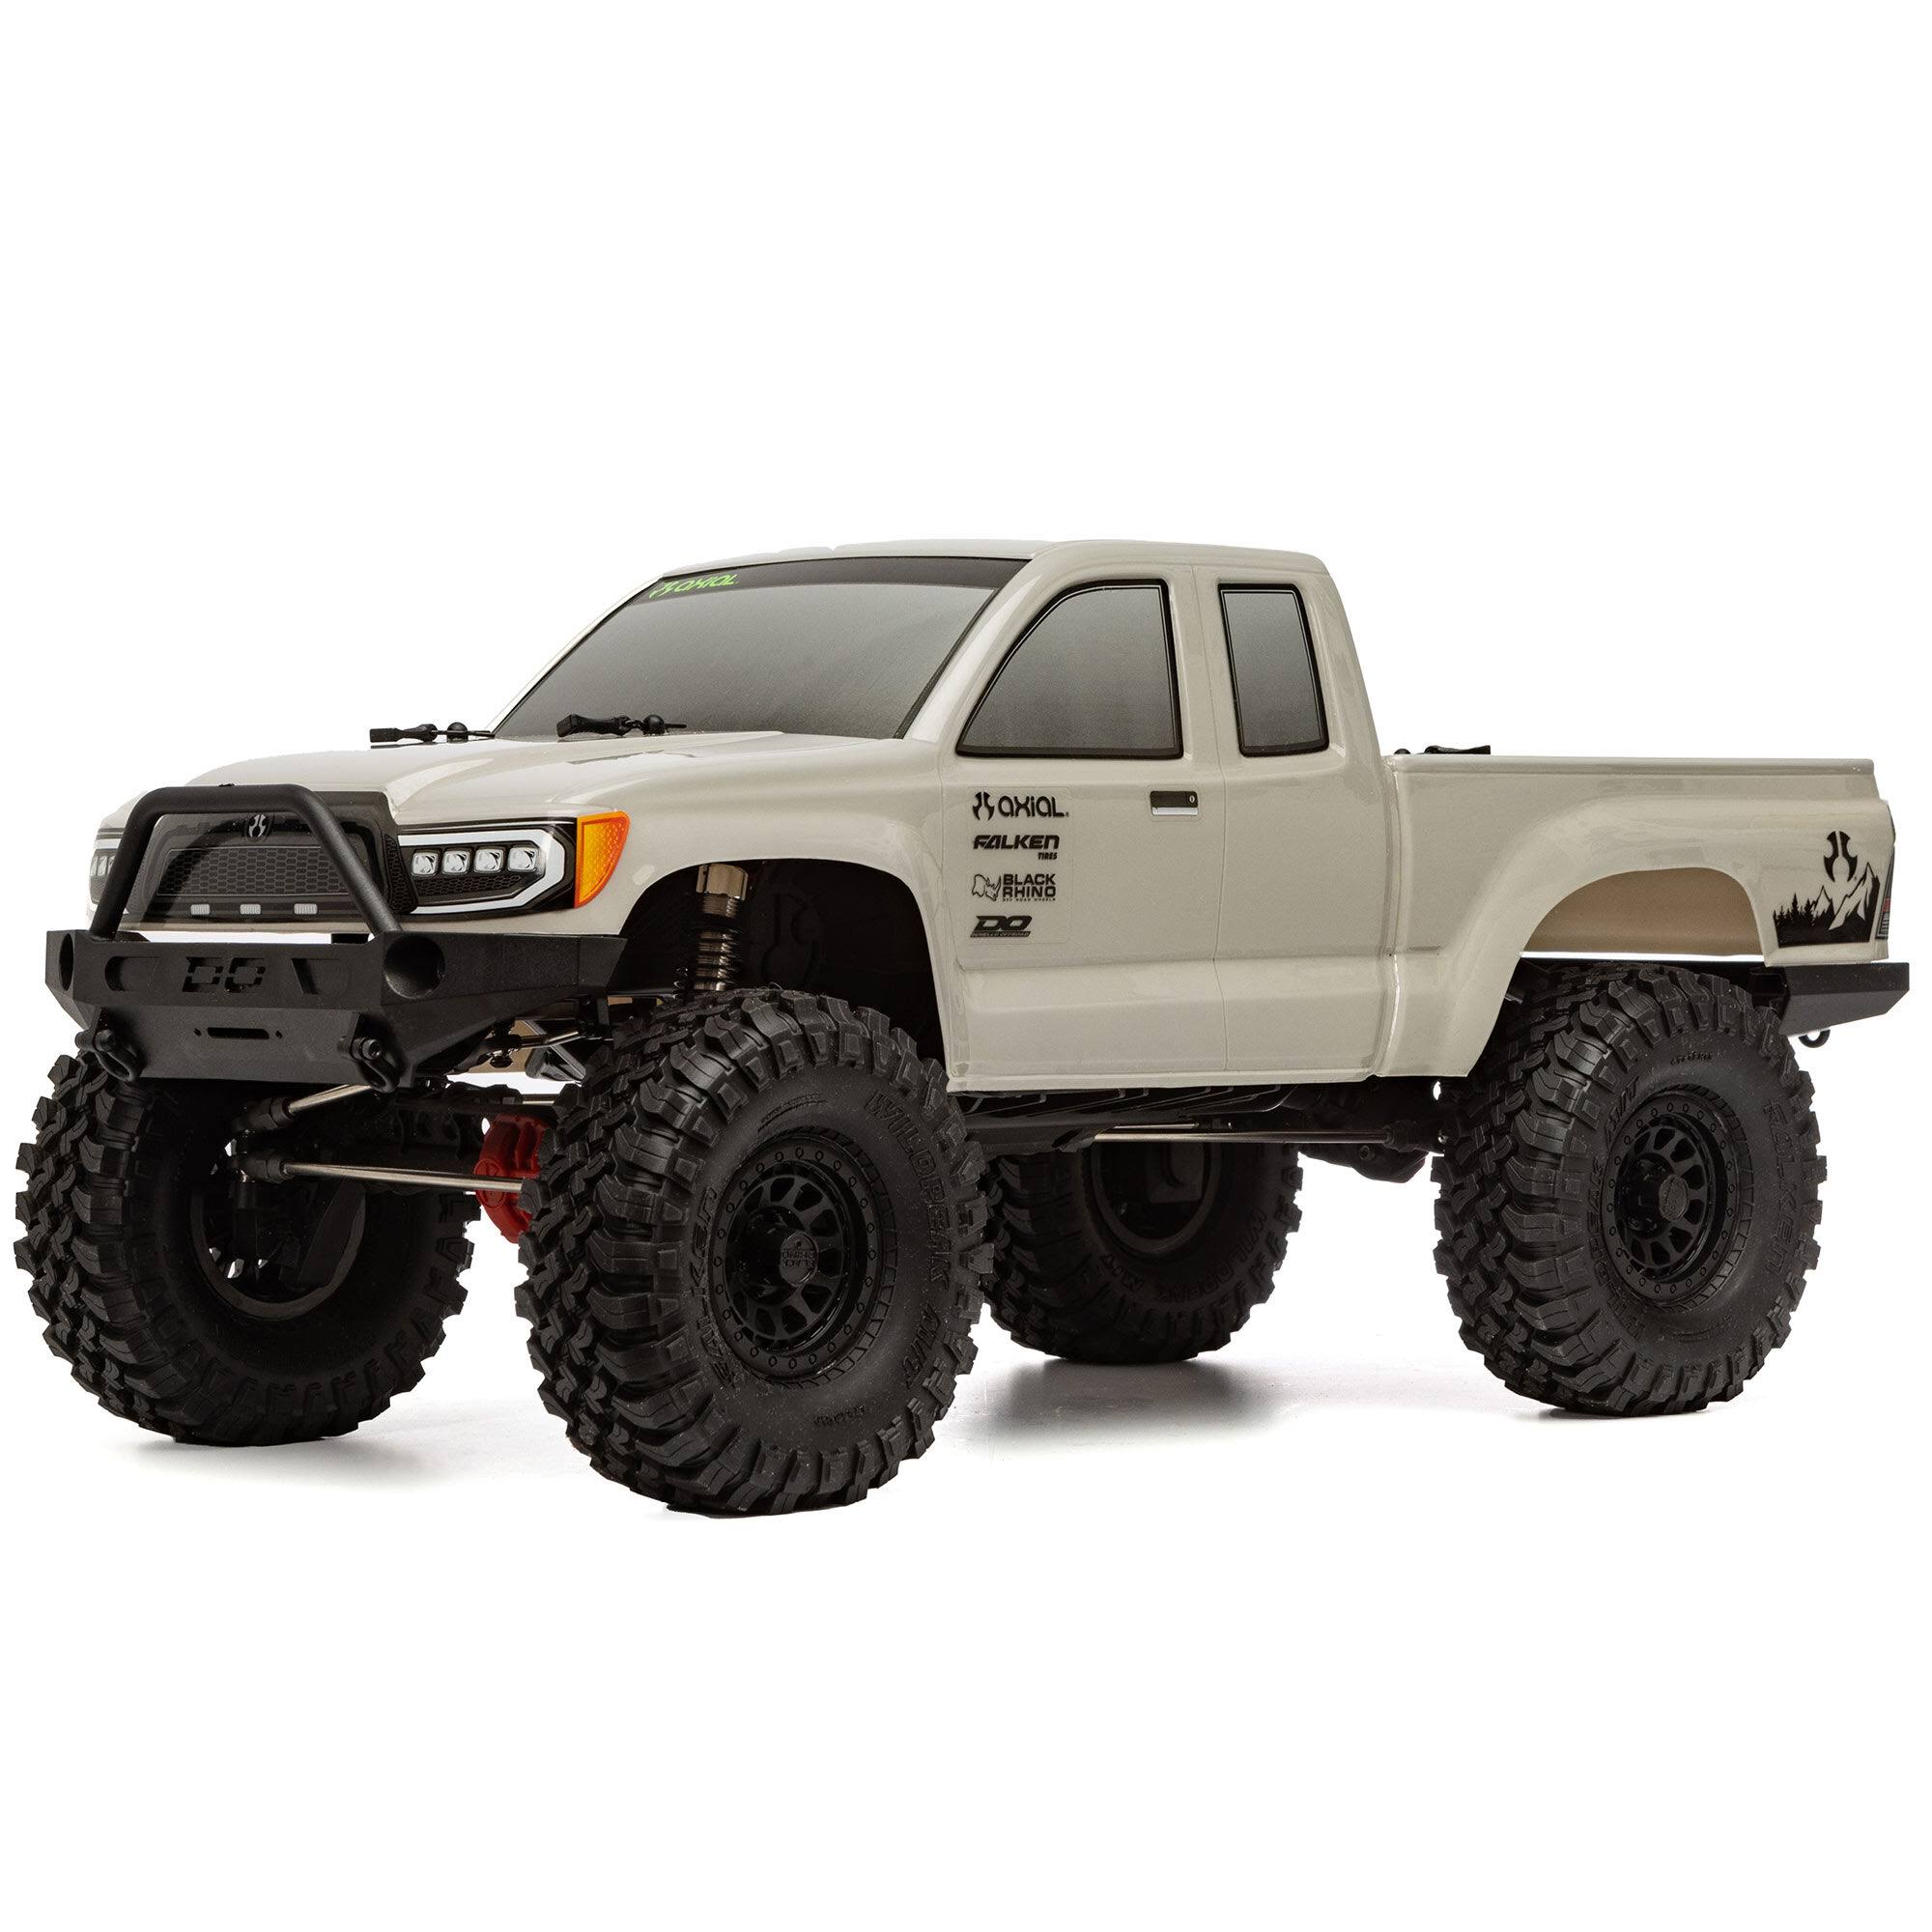 Axial 1/10 Scx10 III Base Camp 4WD Rock Crawler Brushed RTR Grey (C-Axi03027T3)